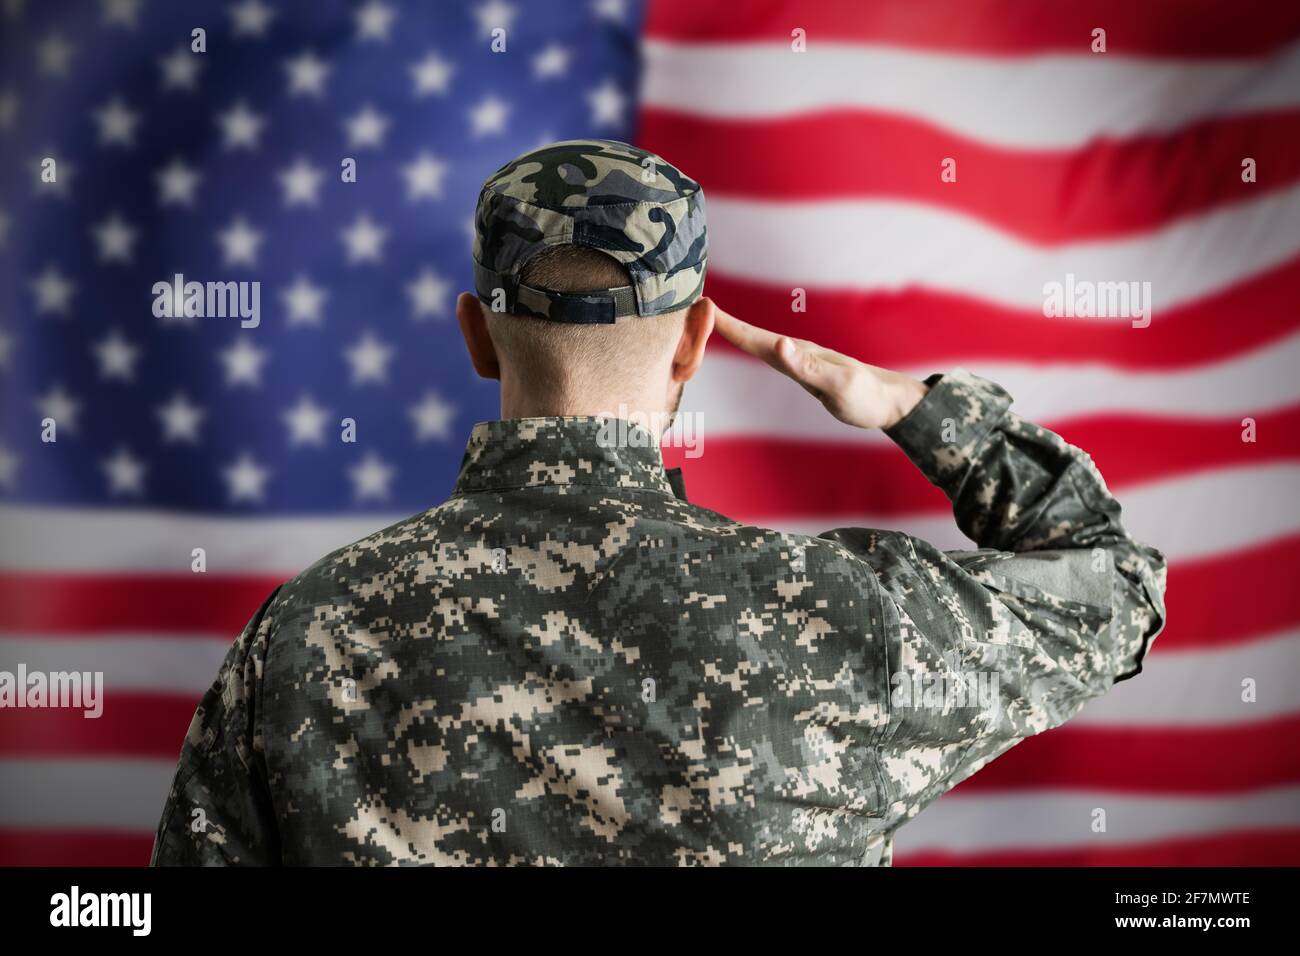 Military US Soldier Saluting Flag. Army Veteran Stock Photo